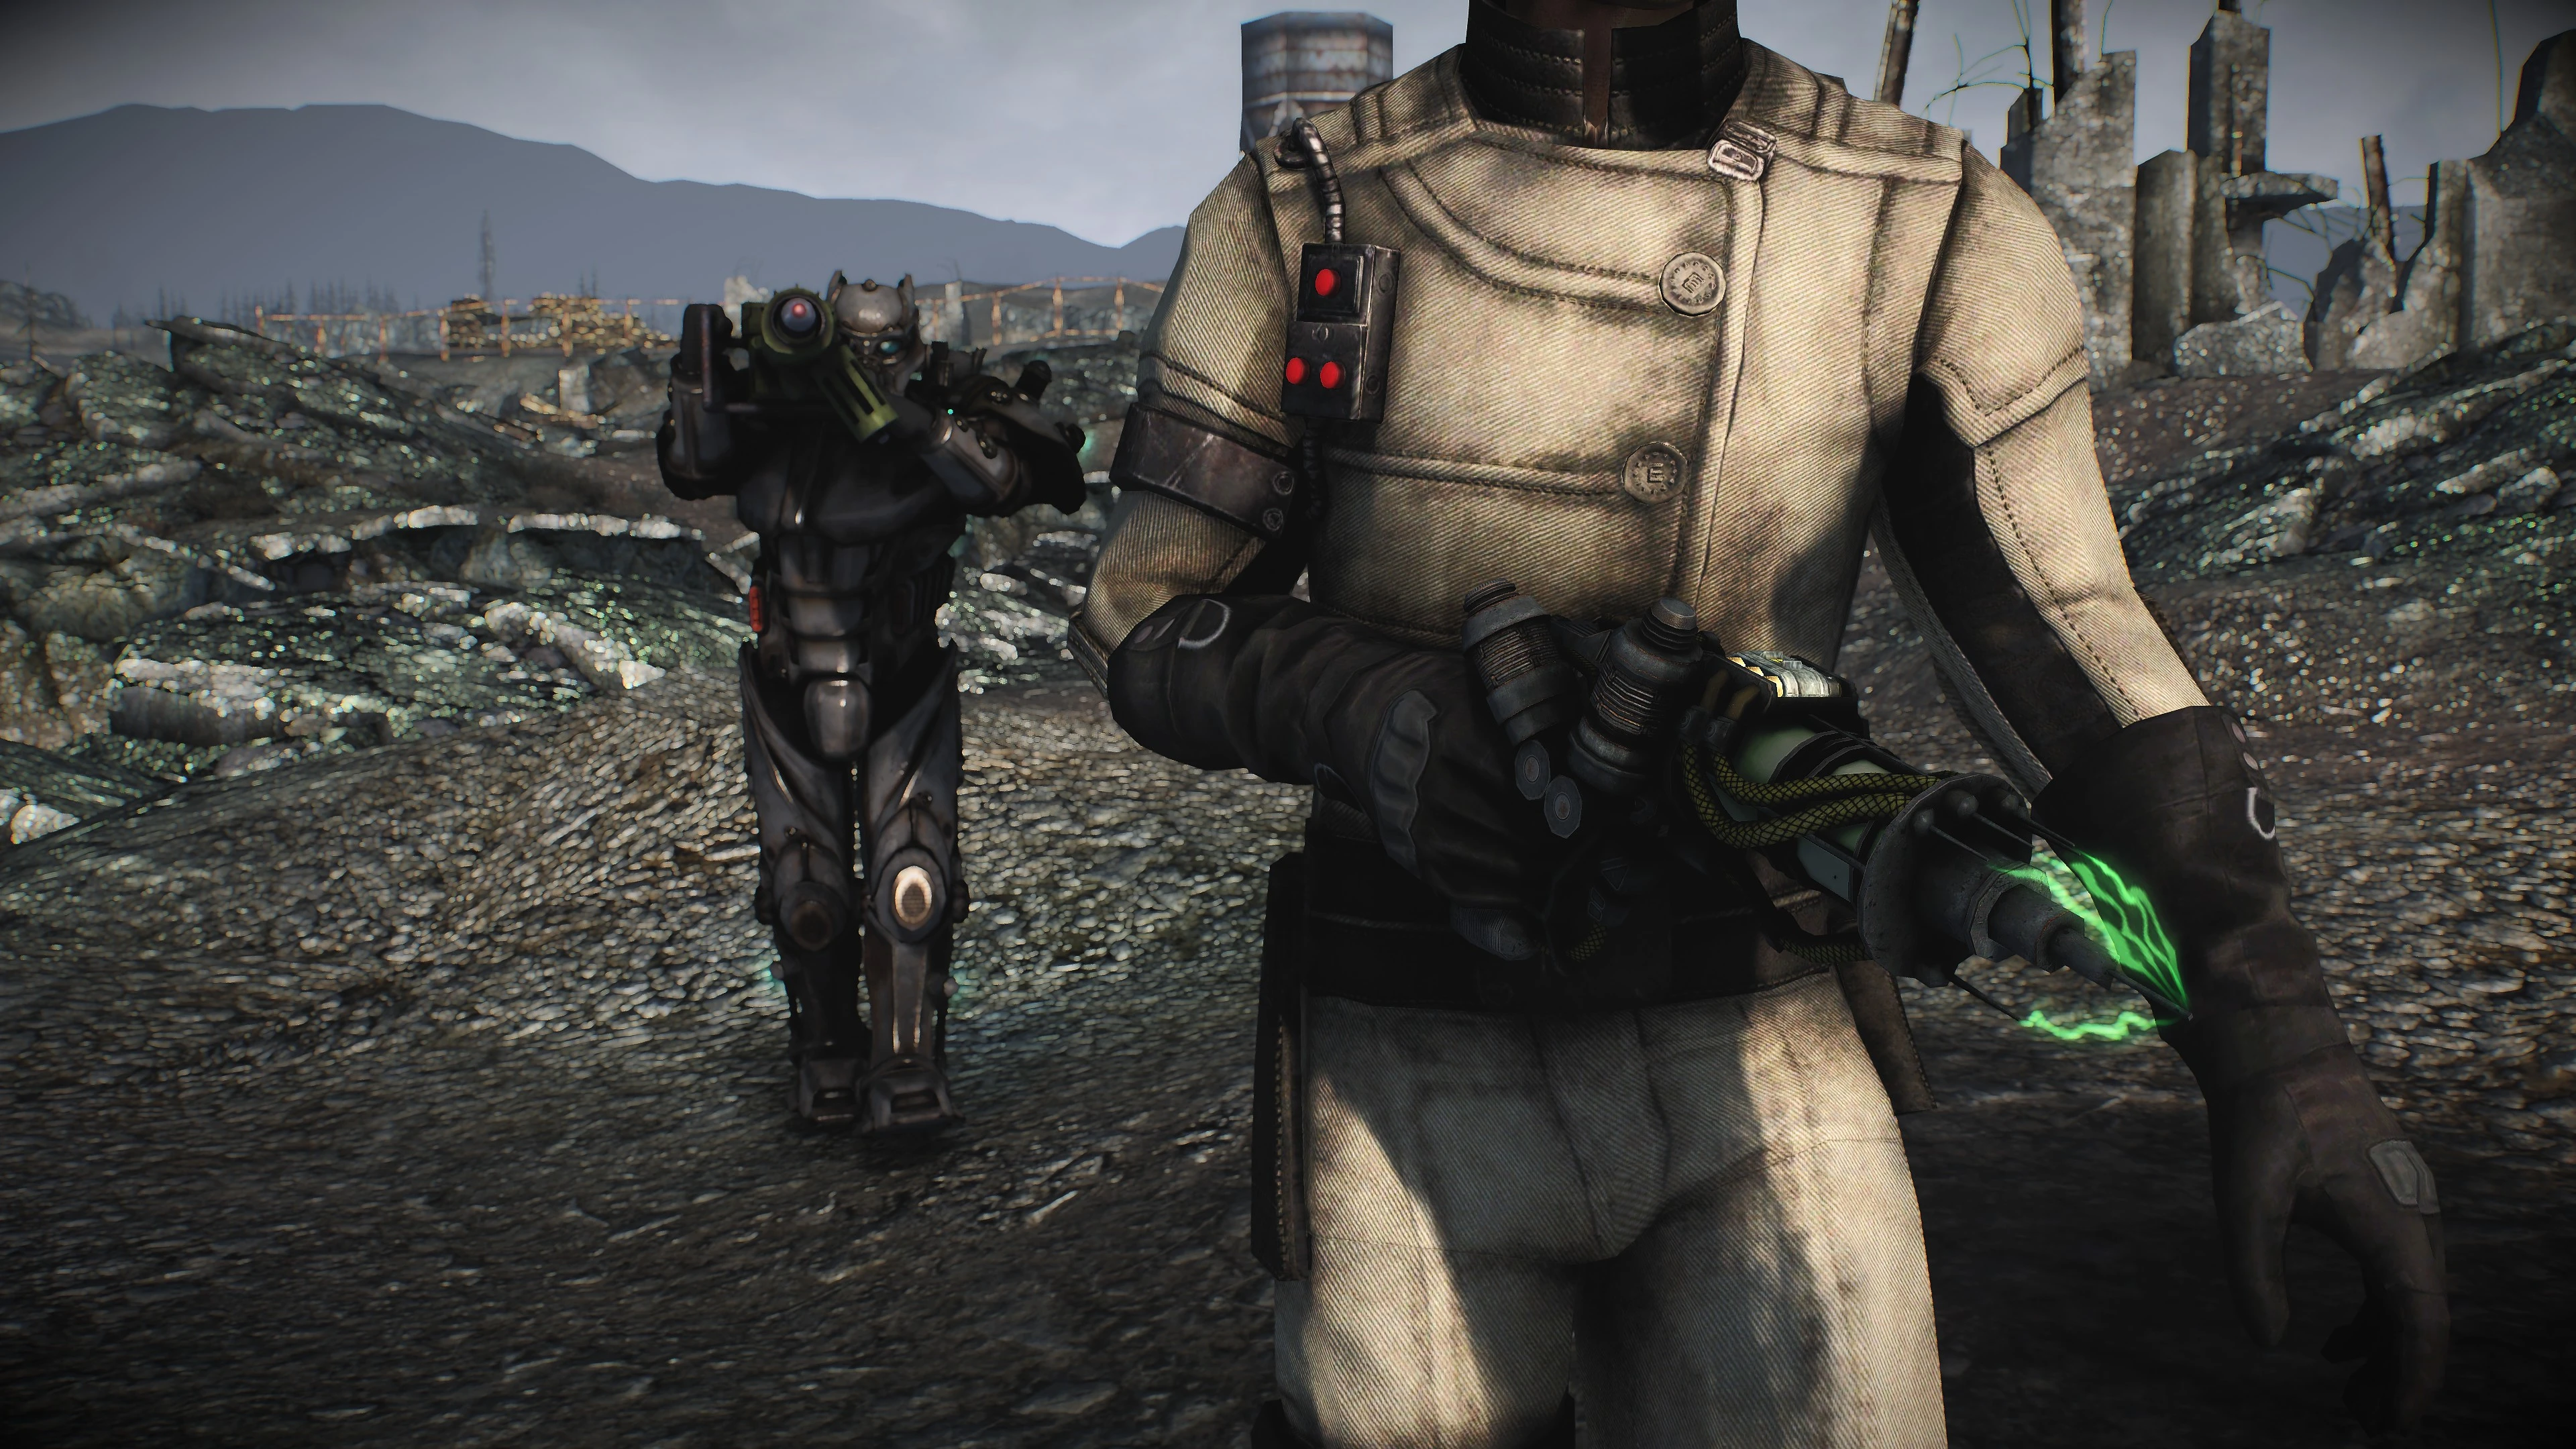 Fallout new nexus. Фоллаут 3. Fallout 3 Enclave. Фоллаут 3 анклав. Шапка анклав фоллаут 3.